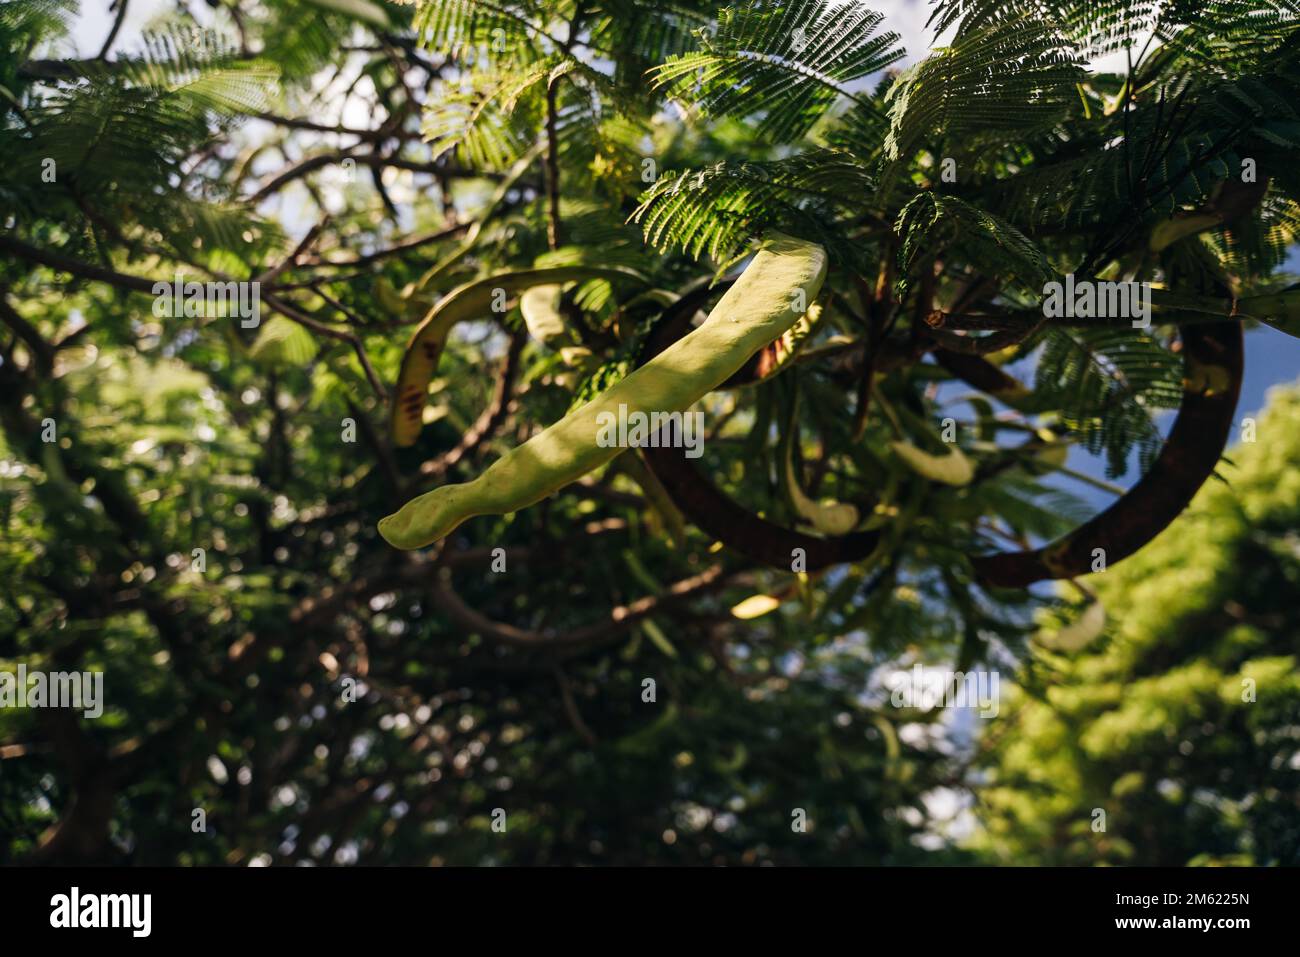 The White Popinac vegetable or (Leucaena leucocephala - in Latin) photogrpahed at close range on the branches . High quality photo Stock Photo